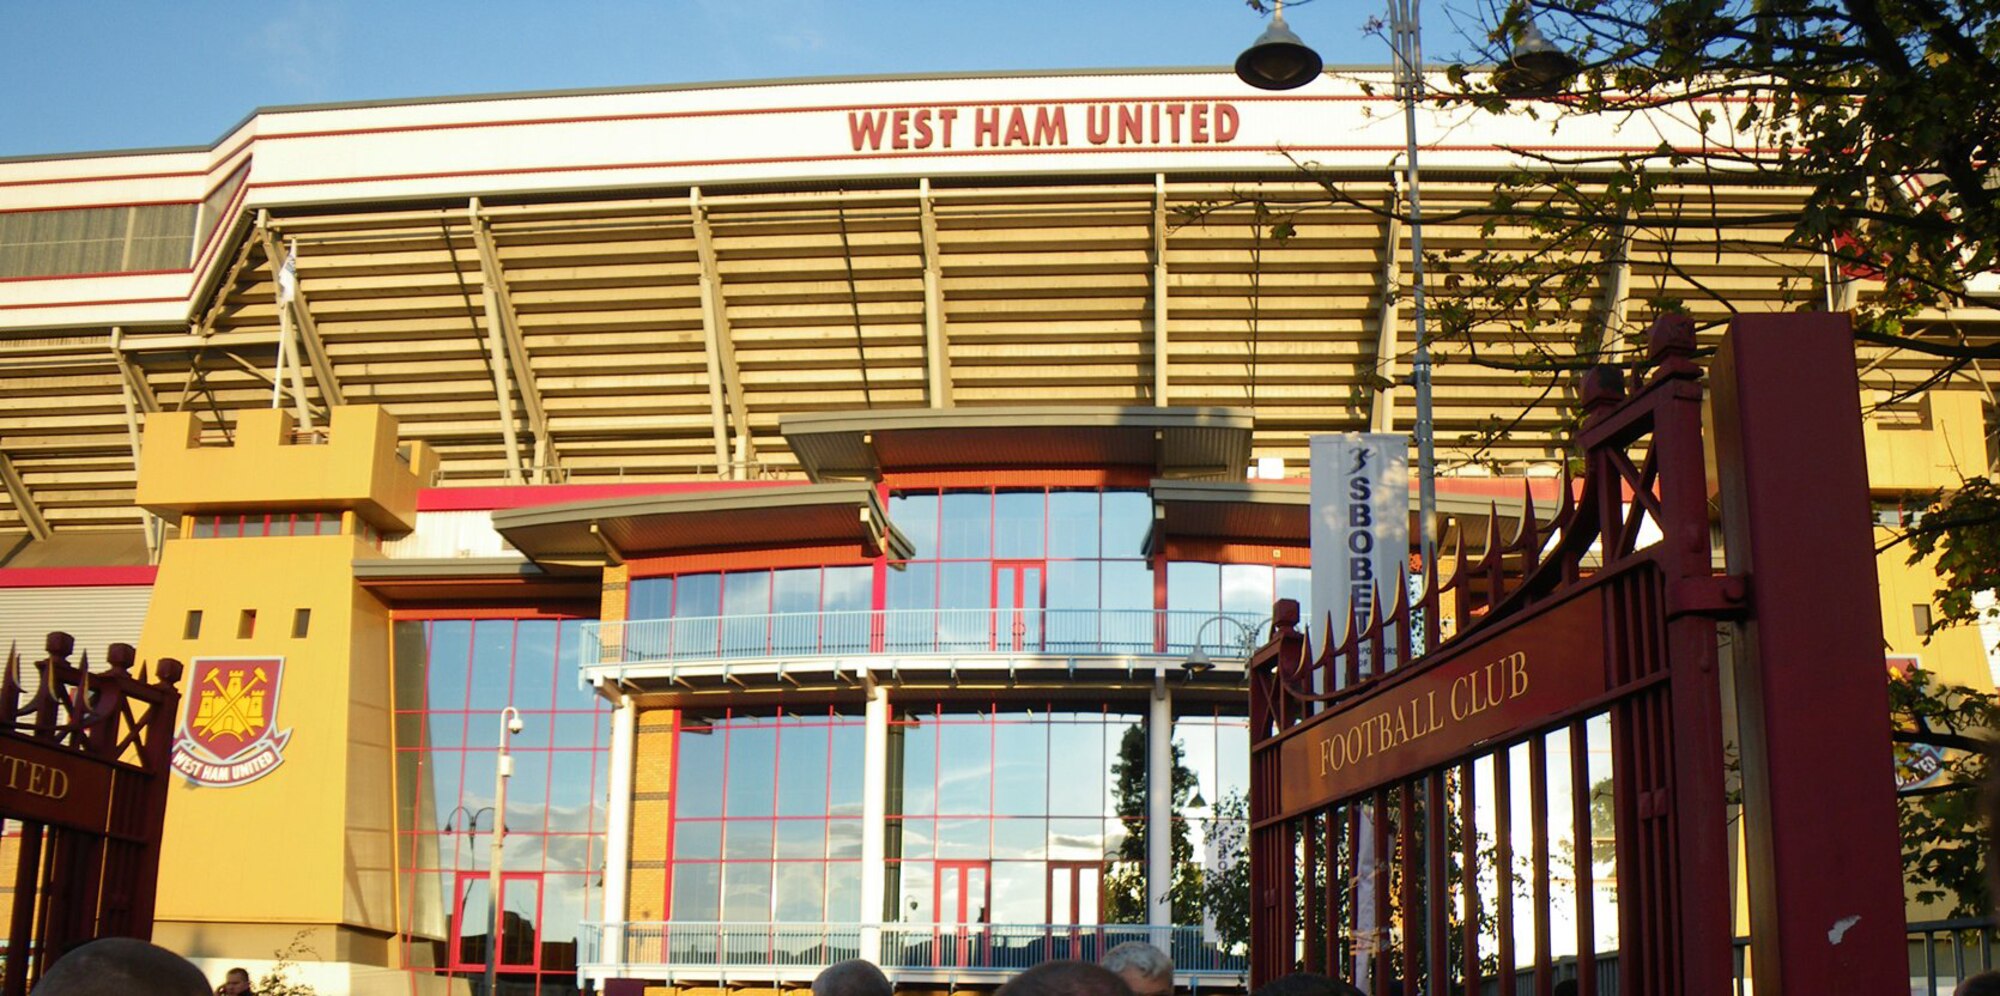 A view from the front of Boleyn Ground in Upton Park, London, Oct. 24, 2010. Boleyn Ground is home to the West Ham United Football Club. (U.S. Air Force photo/Tech. Sgt. Kevin Wallace)